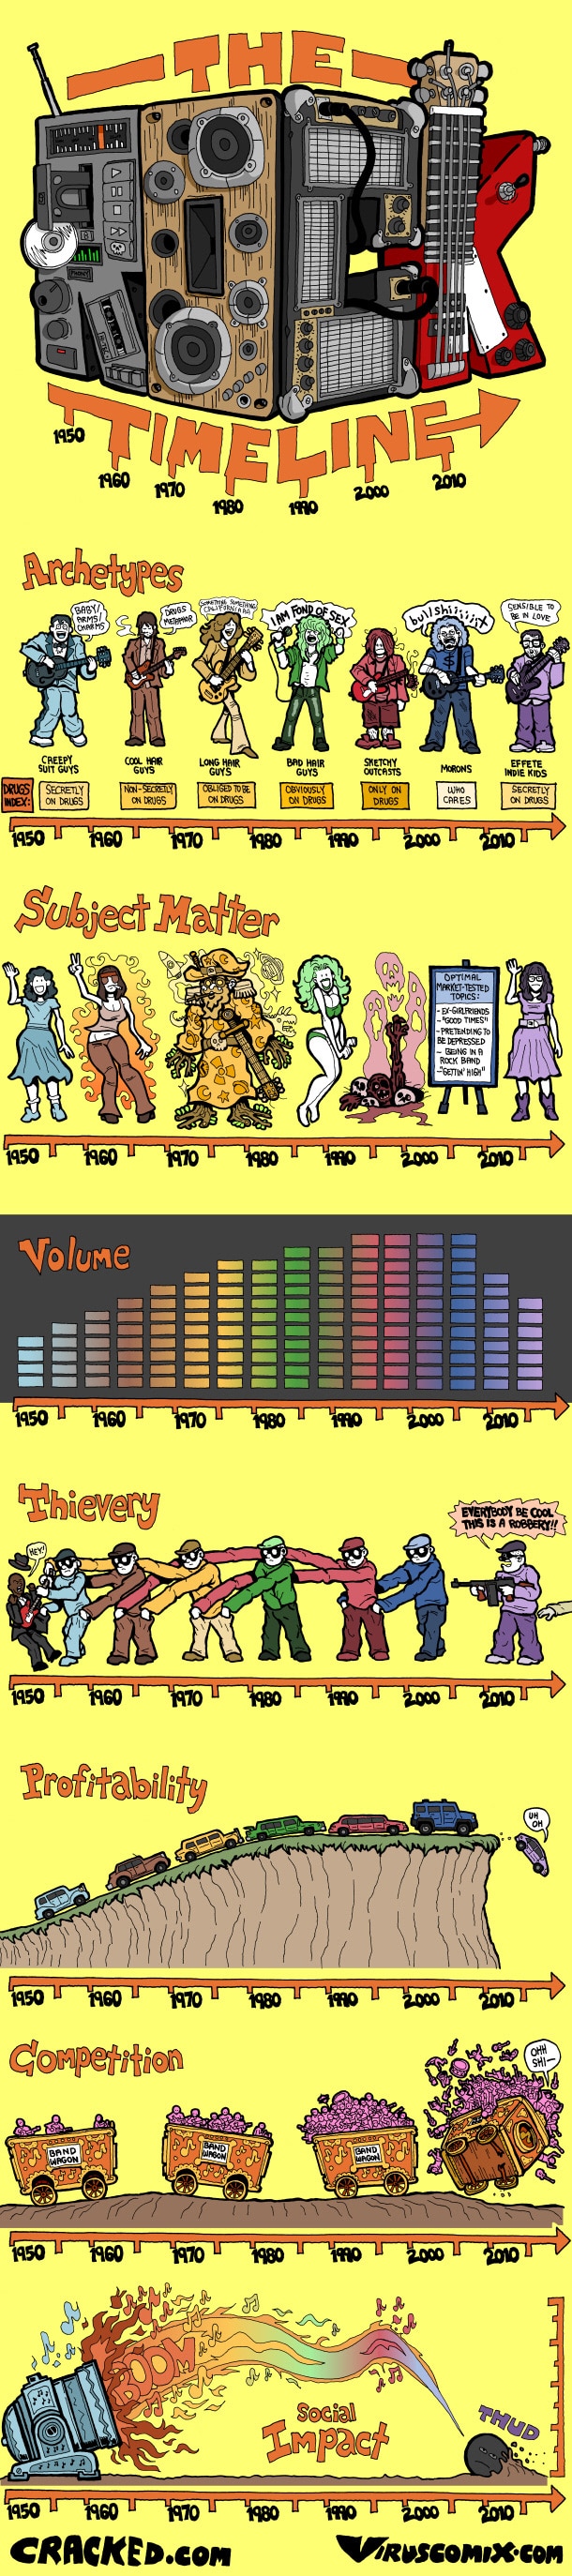 The Hilarious Rock Timeline: From Classic To Modern [Infographic]